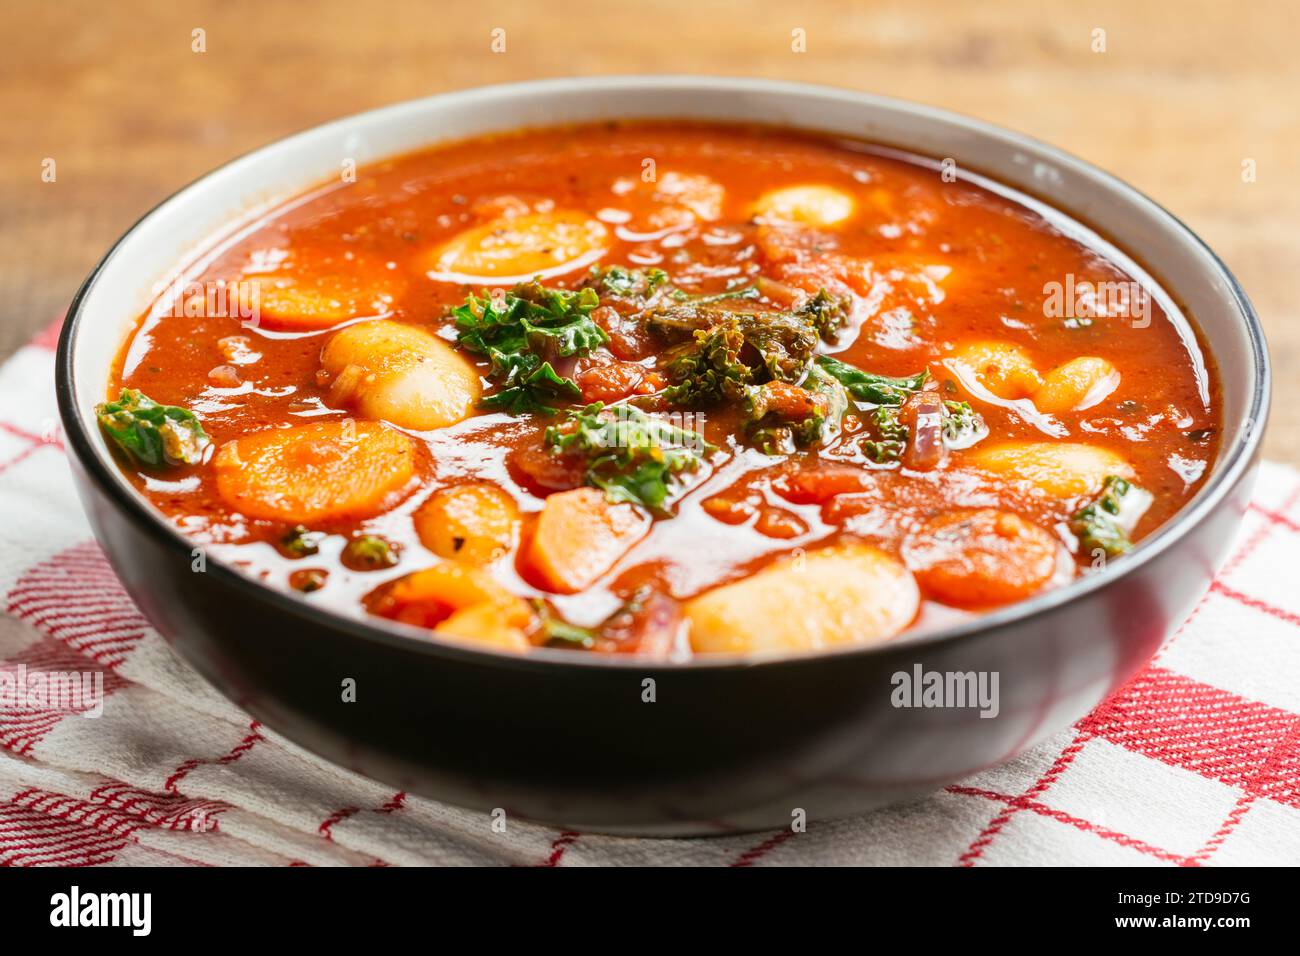 Giant bean soup with kale, carrots and potatoes Stock Photo